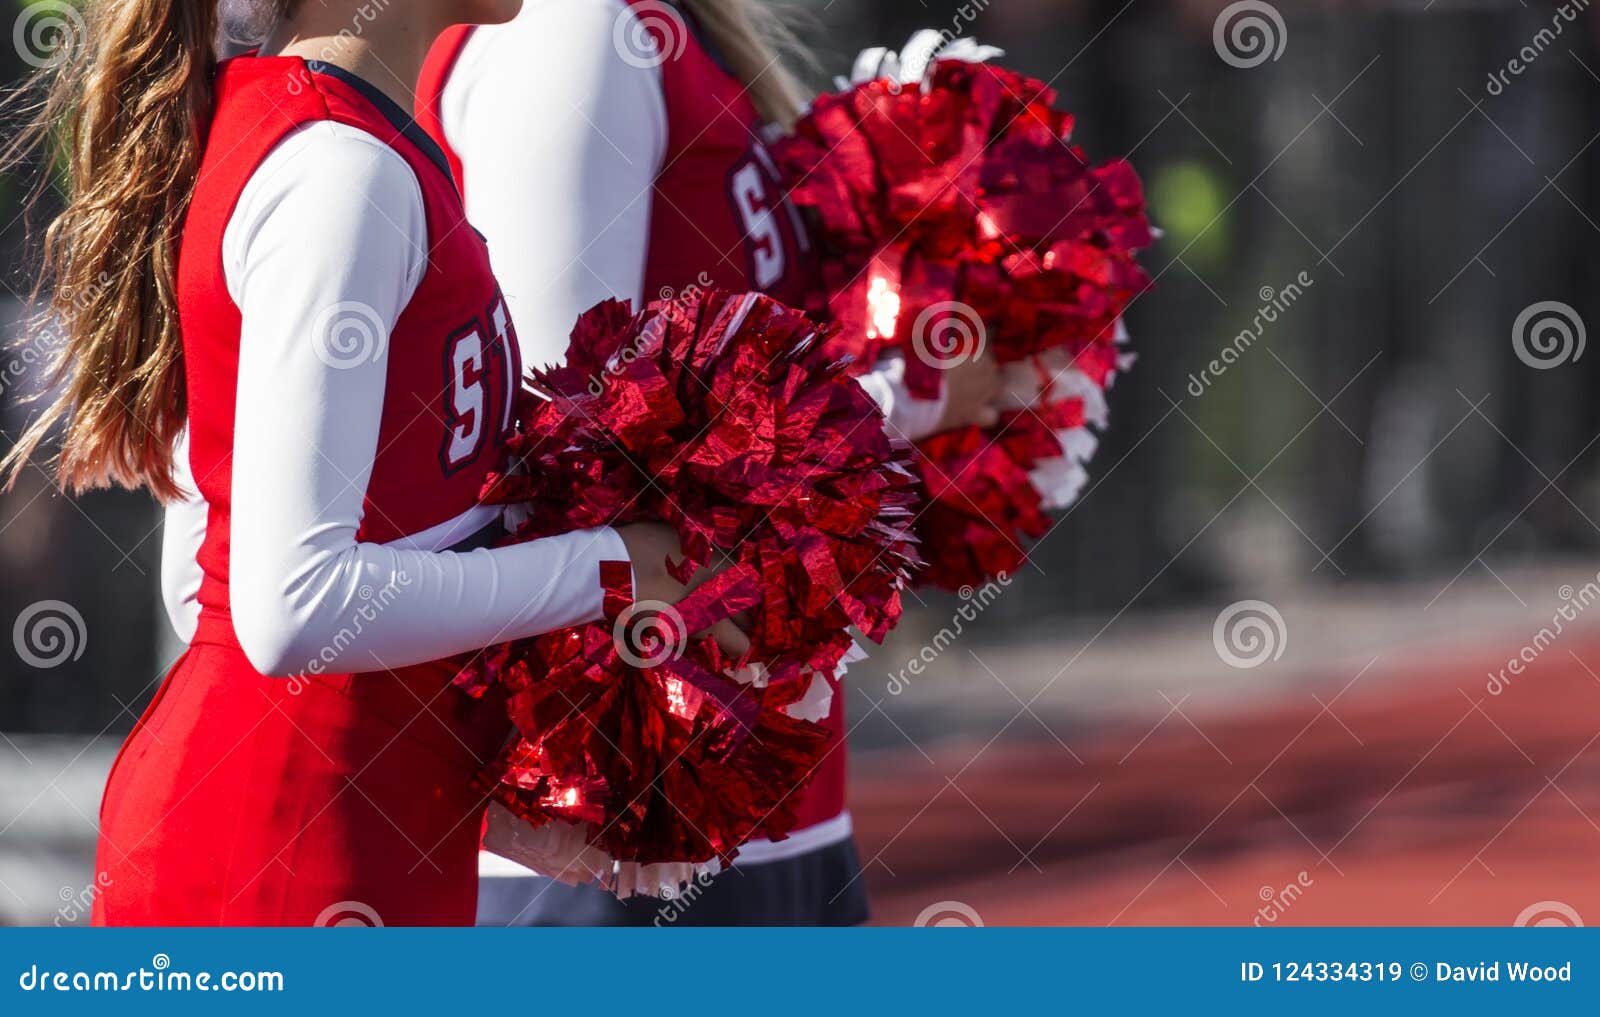 Two Cheerleaders with Red White Pom Poms Stock Image Image of homecoming, blue: 124334319